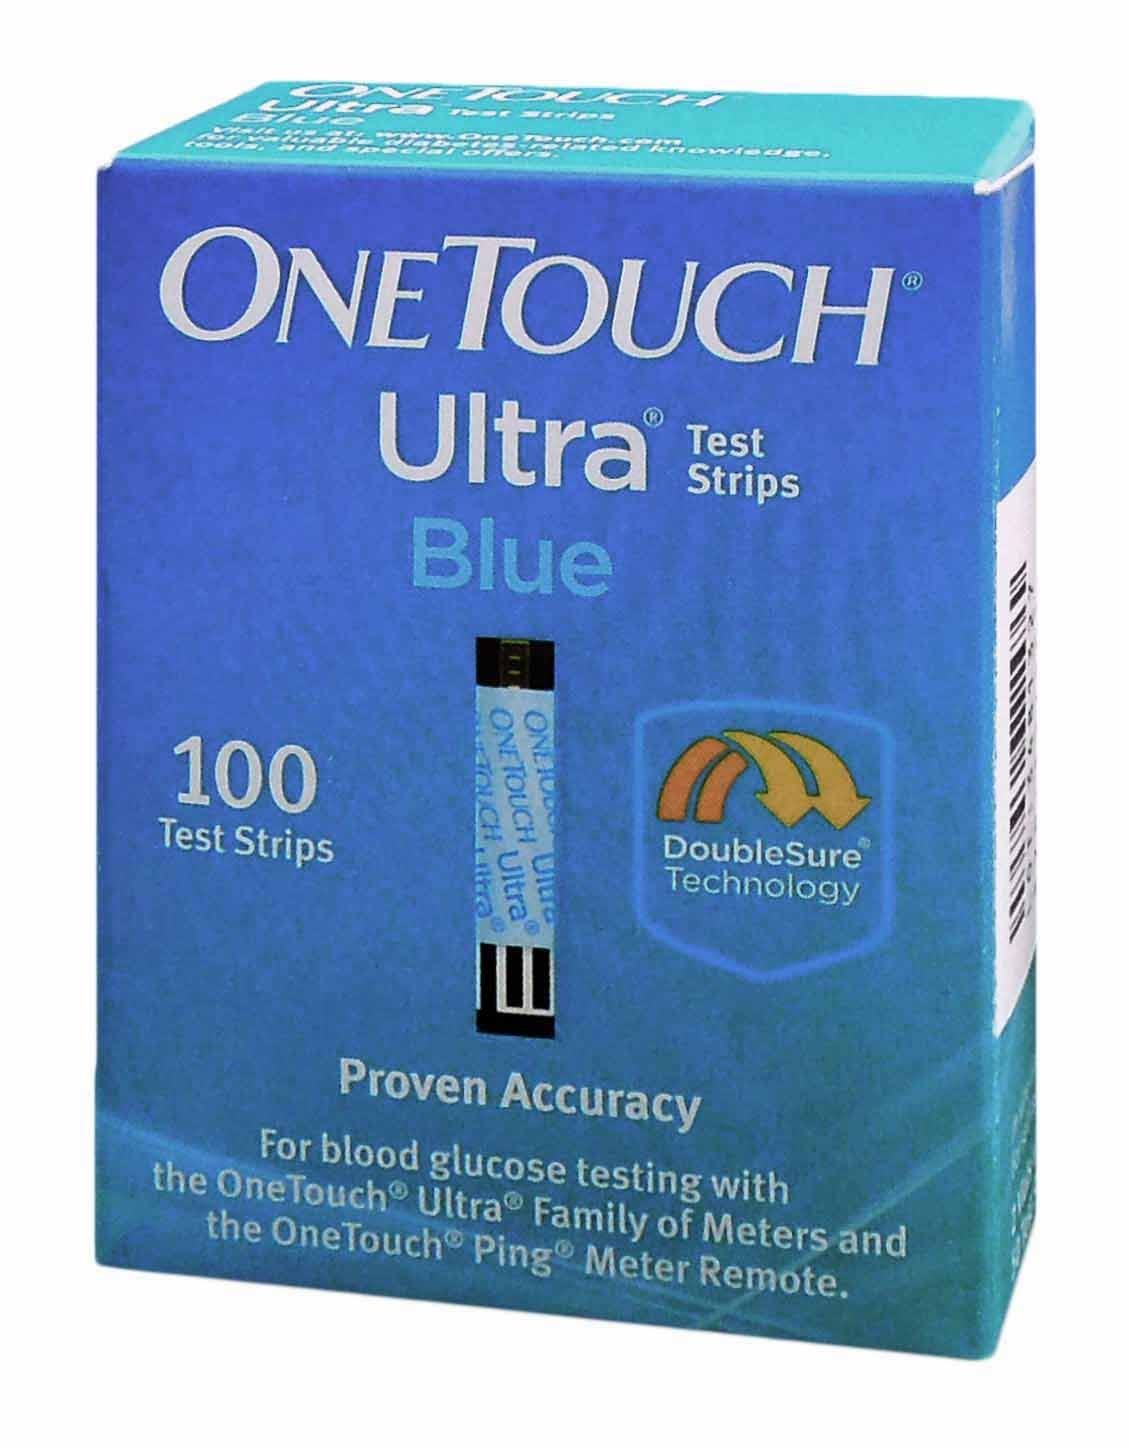 One Touch Ultra Test Strips - Blue, 100 Strips